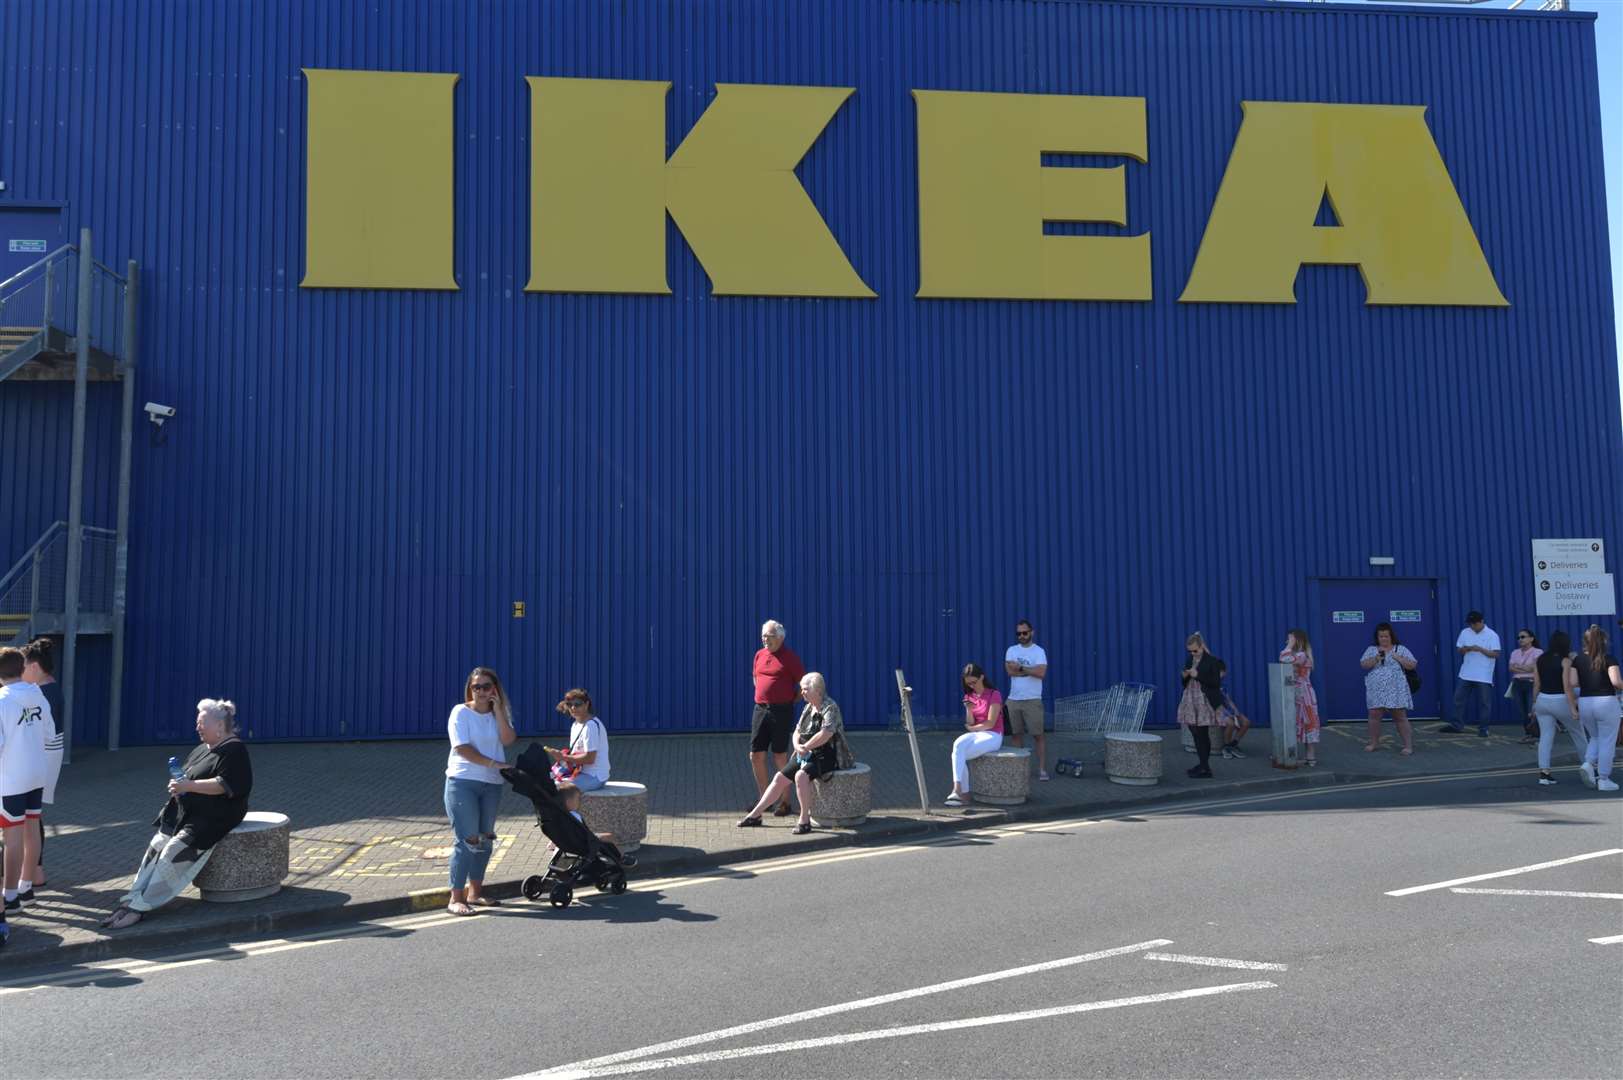 The Ikea store reopened as part of a wider easing of lockdown restrictions in England (Nick Ansell/PA)